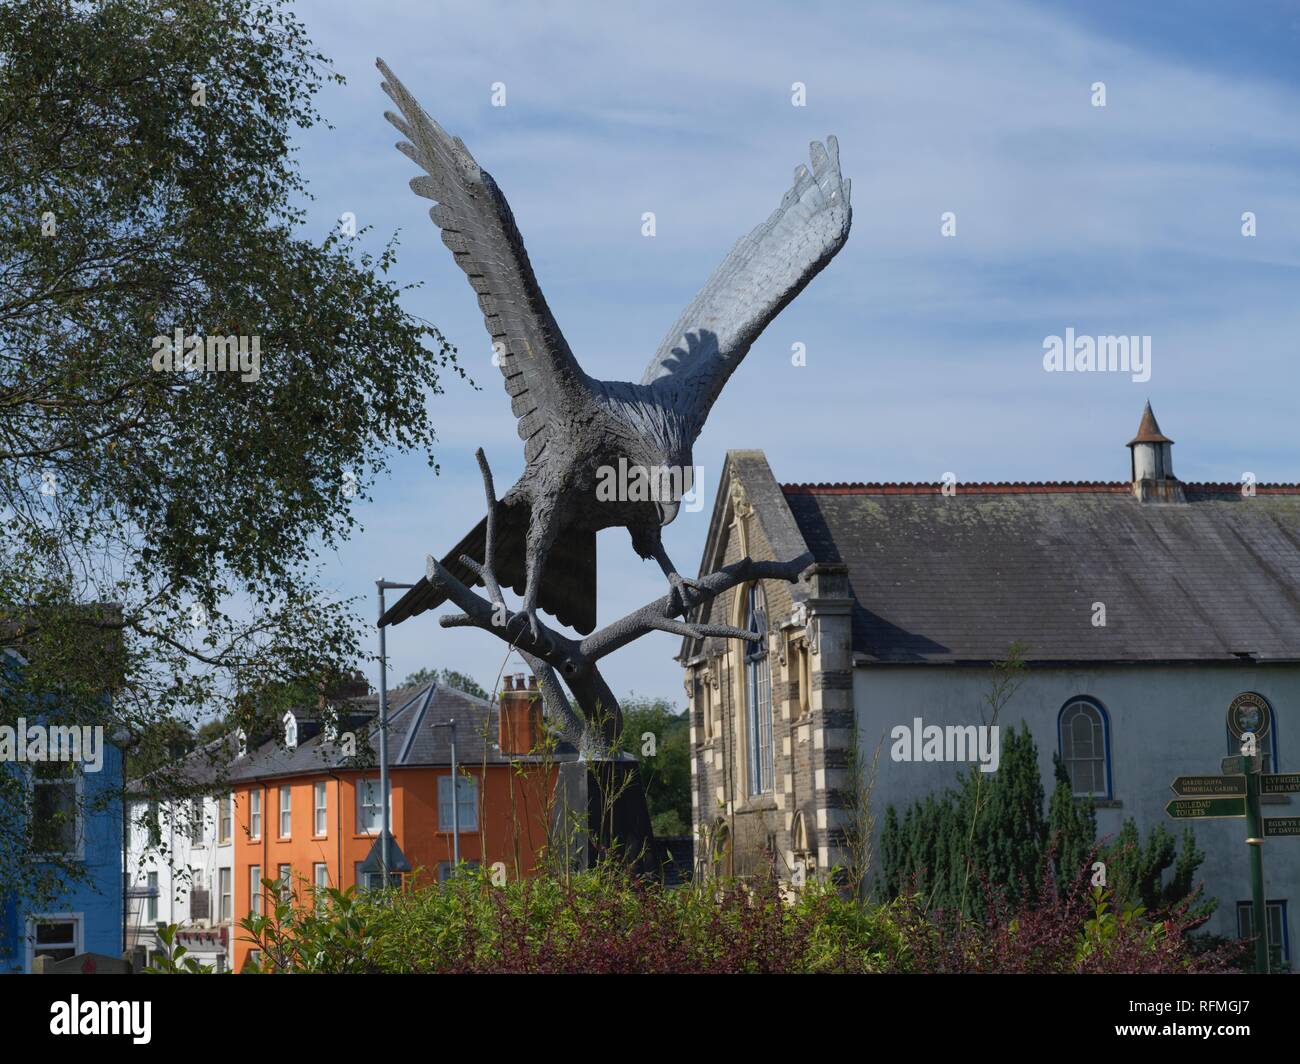 The Red Kite sculpture in Llanwrtyd Wells by the side of the A483 with the former Bethesda Chapel in the background Stock Photo